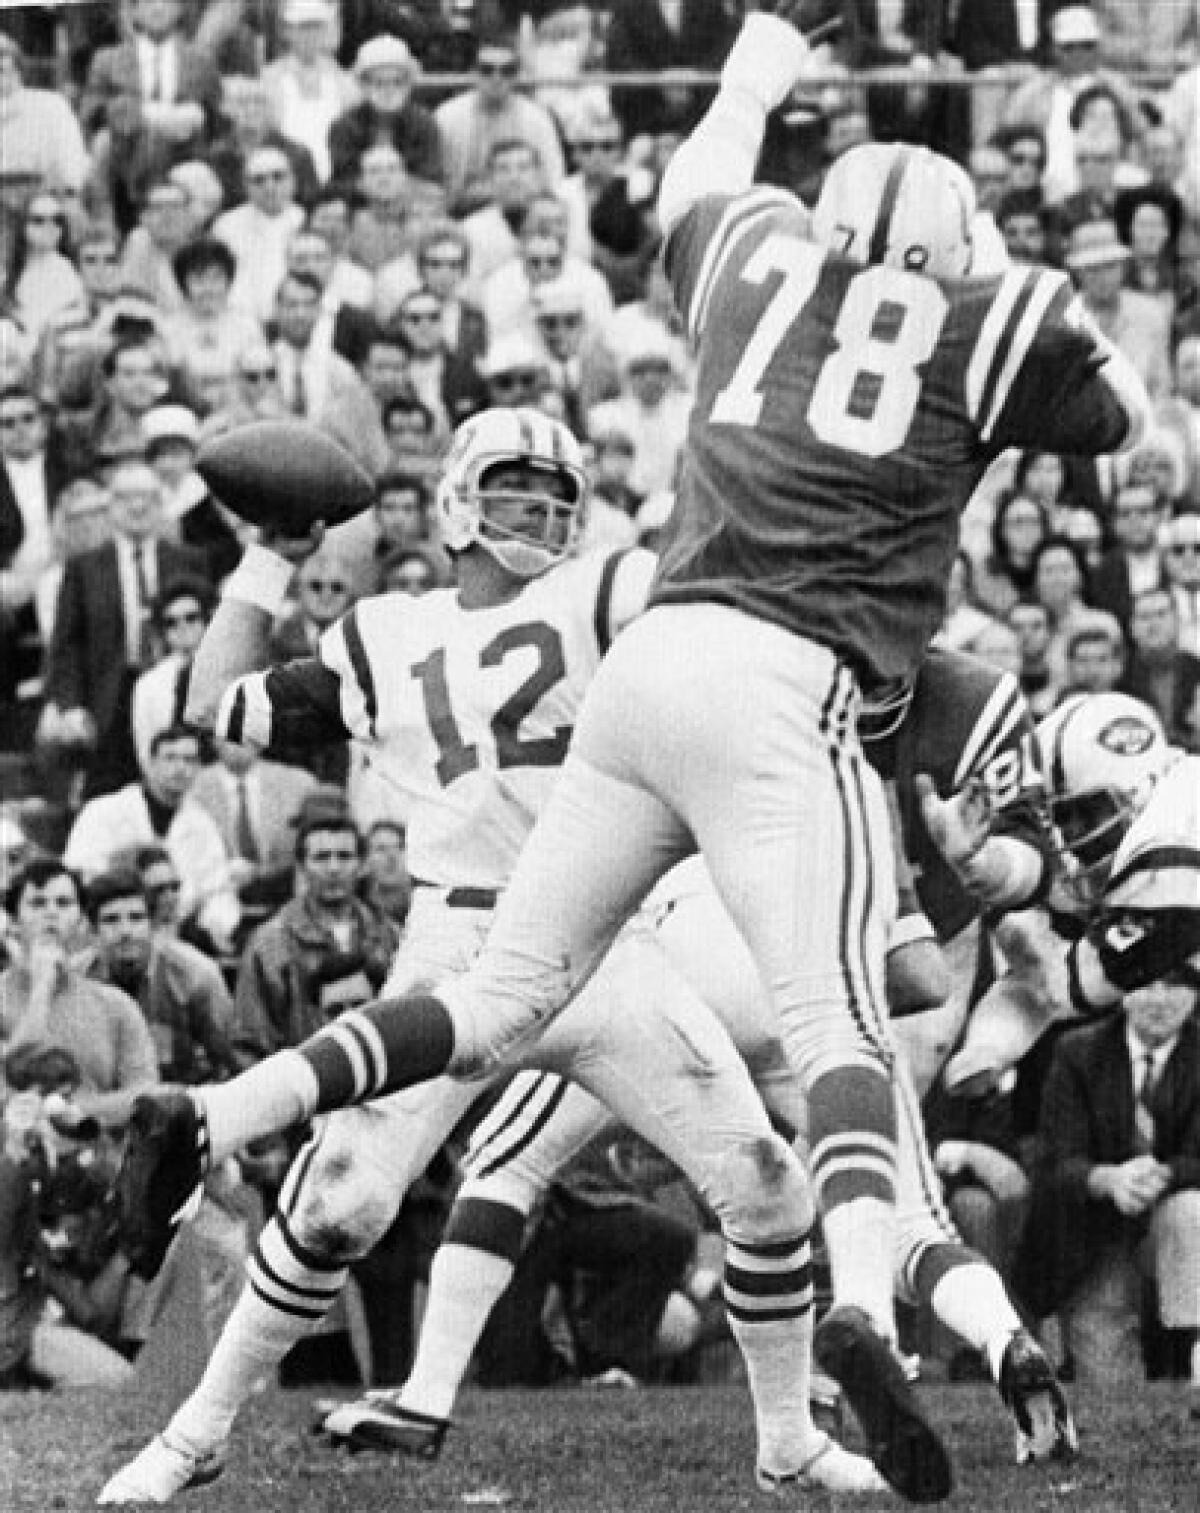 Super Bowl III: or, remembering how Broadway Joe cost me a bicycle